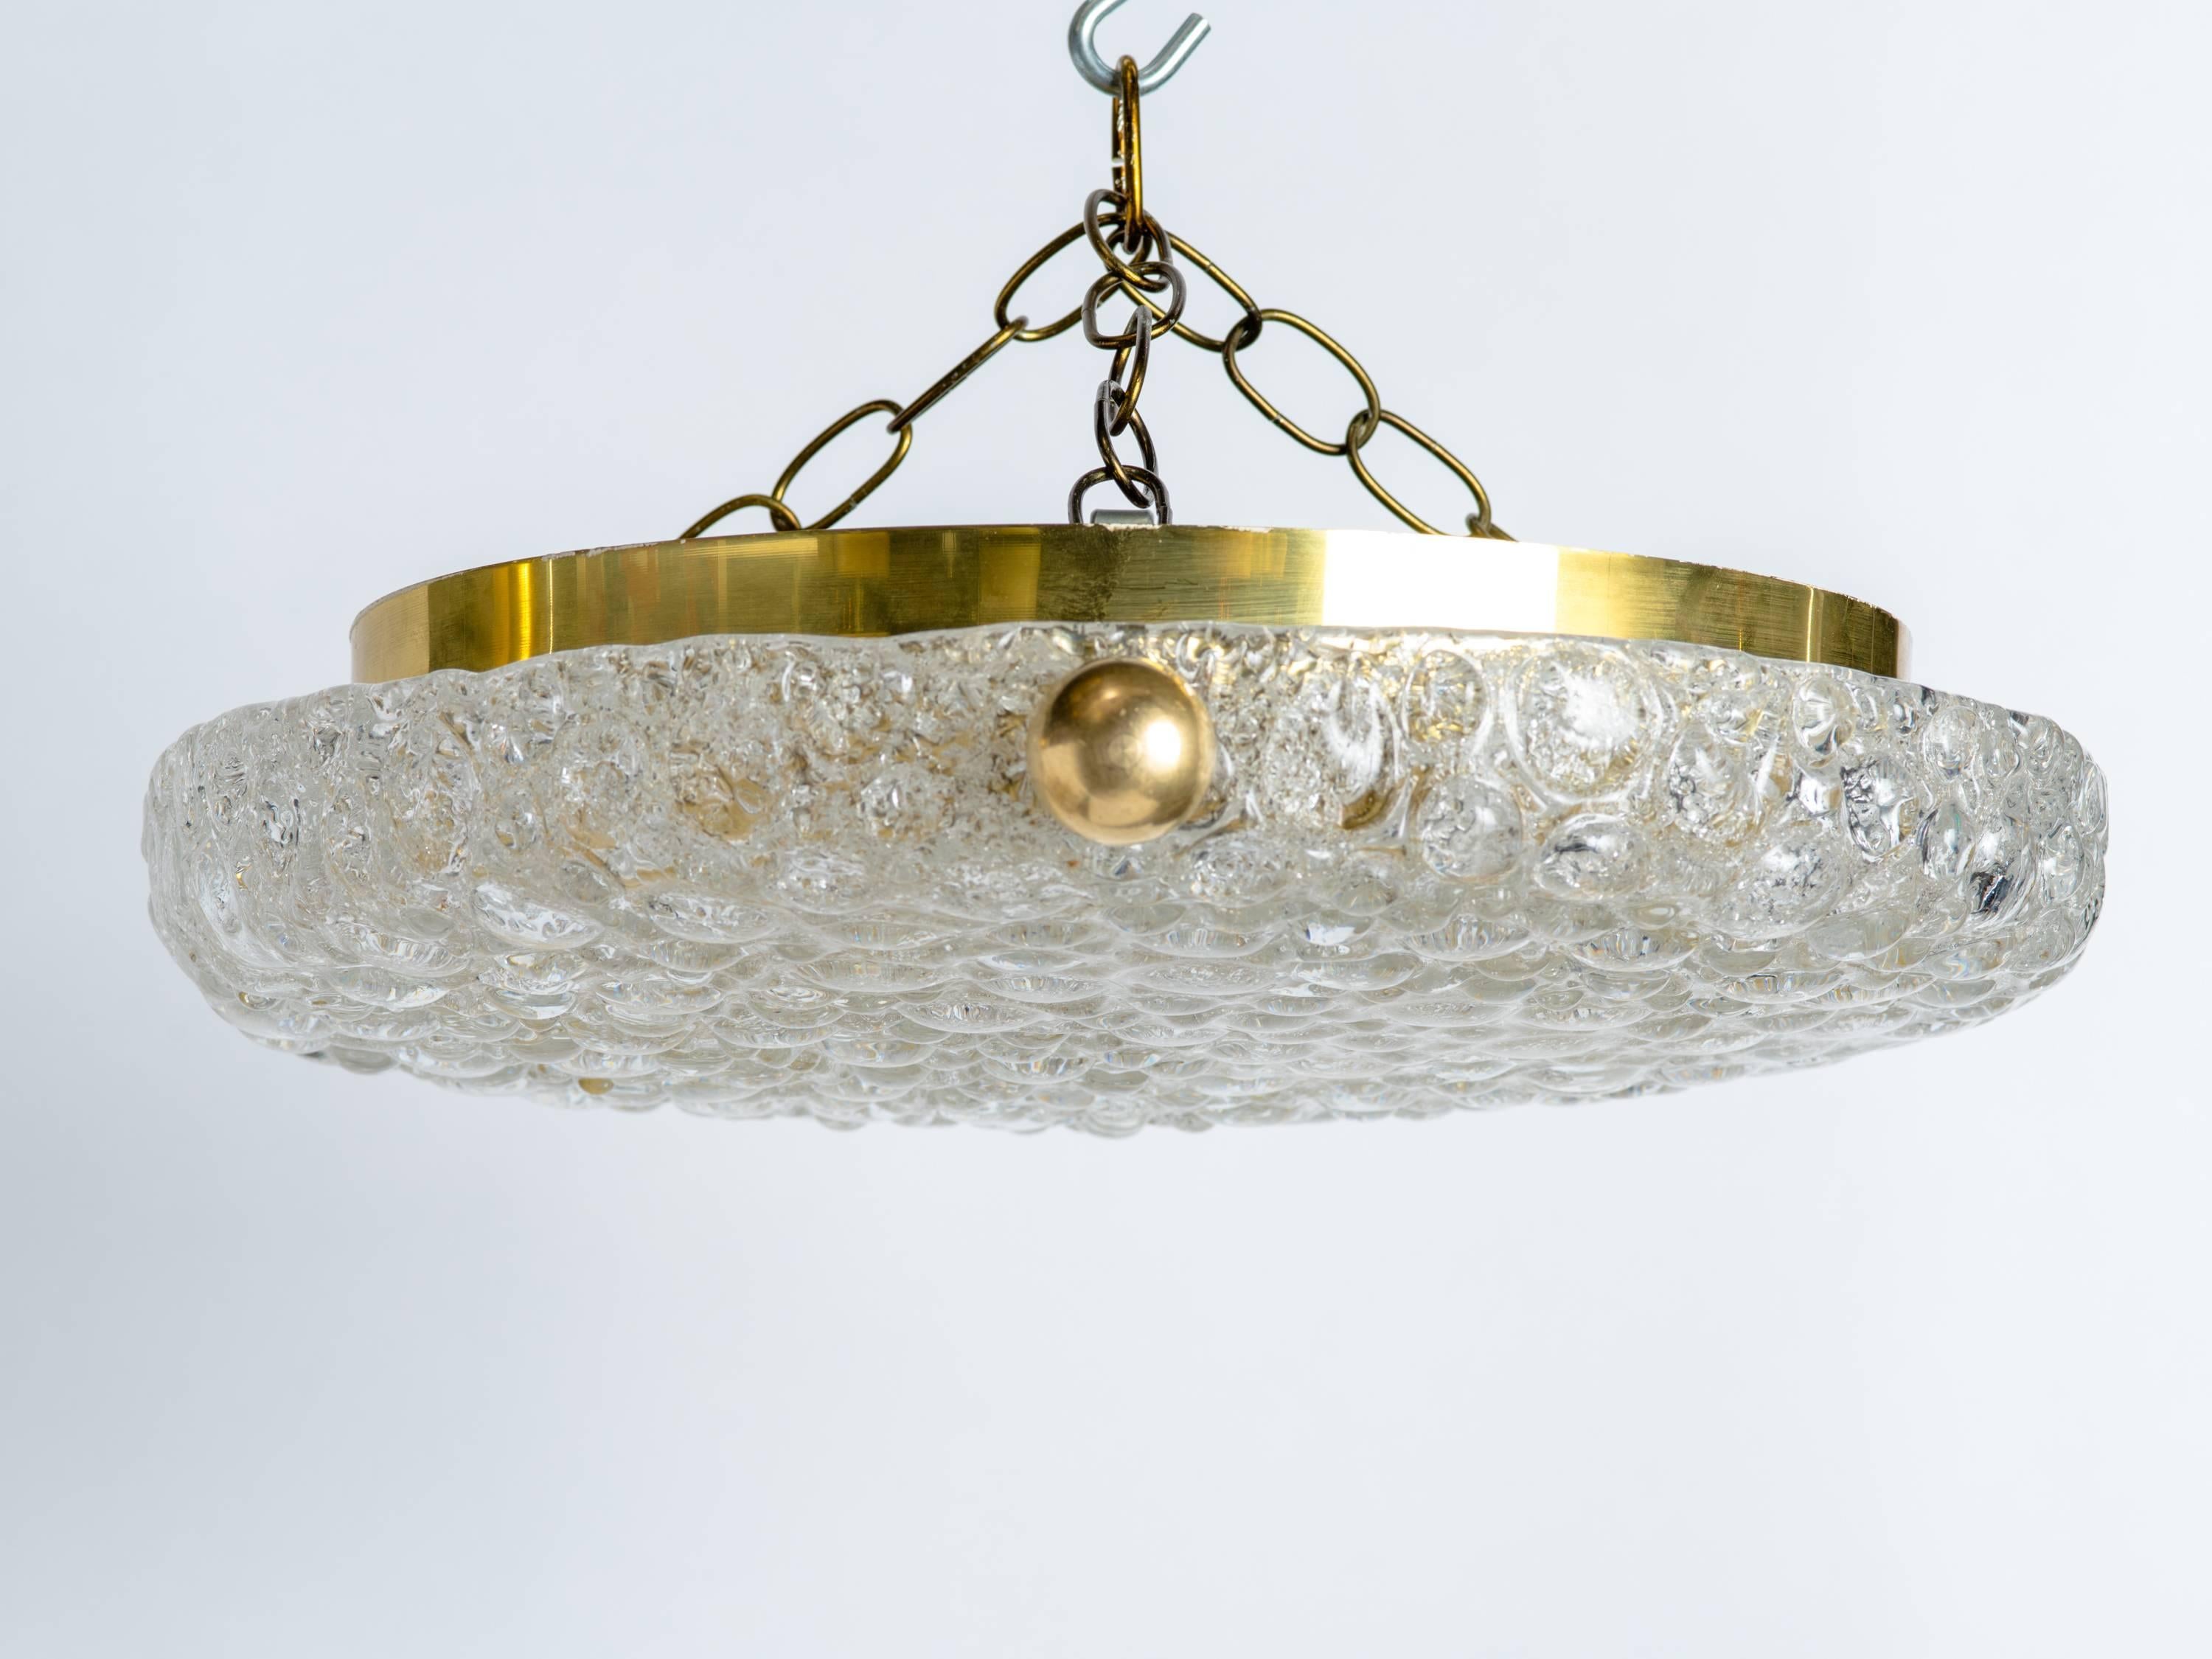 Gorgeous ceiling light comprised of handblown glass with bubble design and texture. The fixture has a circular brass frame with large glass dome, and large brass ball finials. Conveniently fitted with four lights.